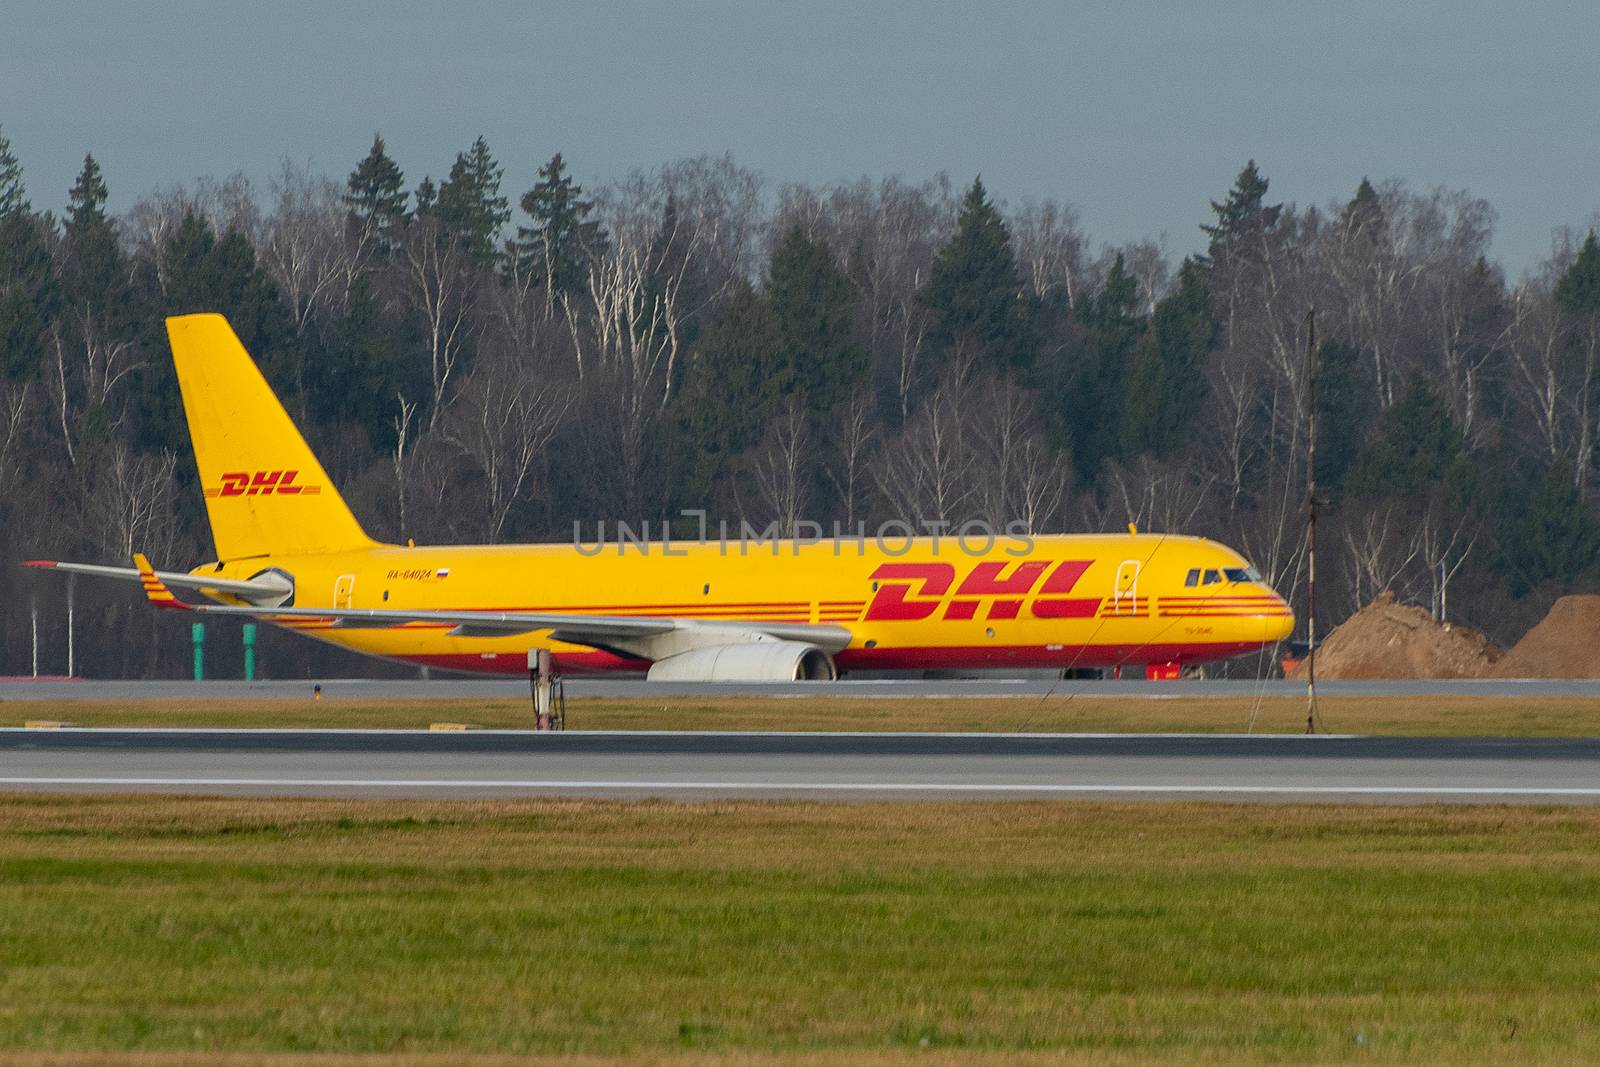 October 29, 2019, Moscow, Russia. Plane 
Tupolev Tu-204 Aviastar Airlines in livery DHL at Sheremetyevo airport in Moscow.